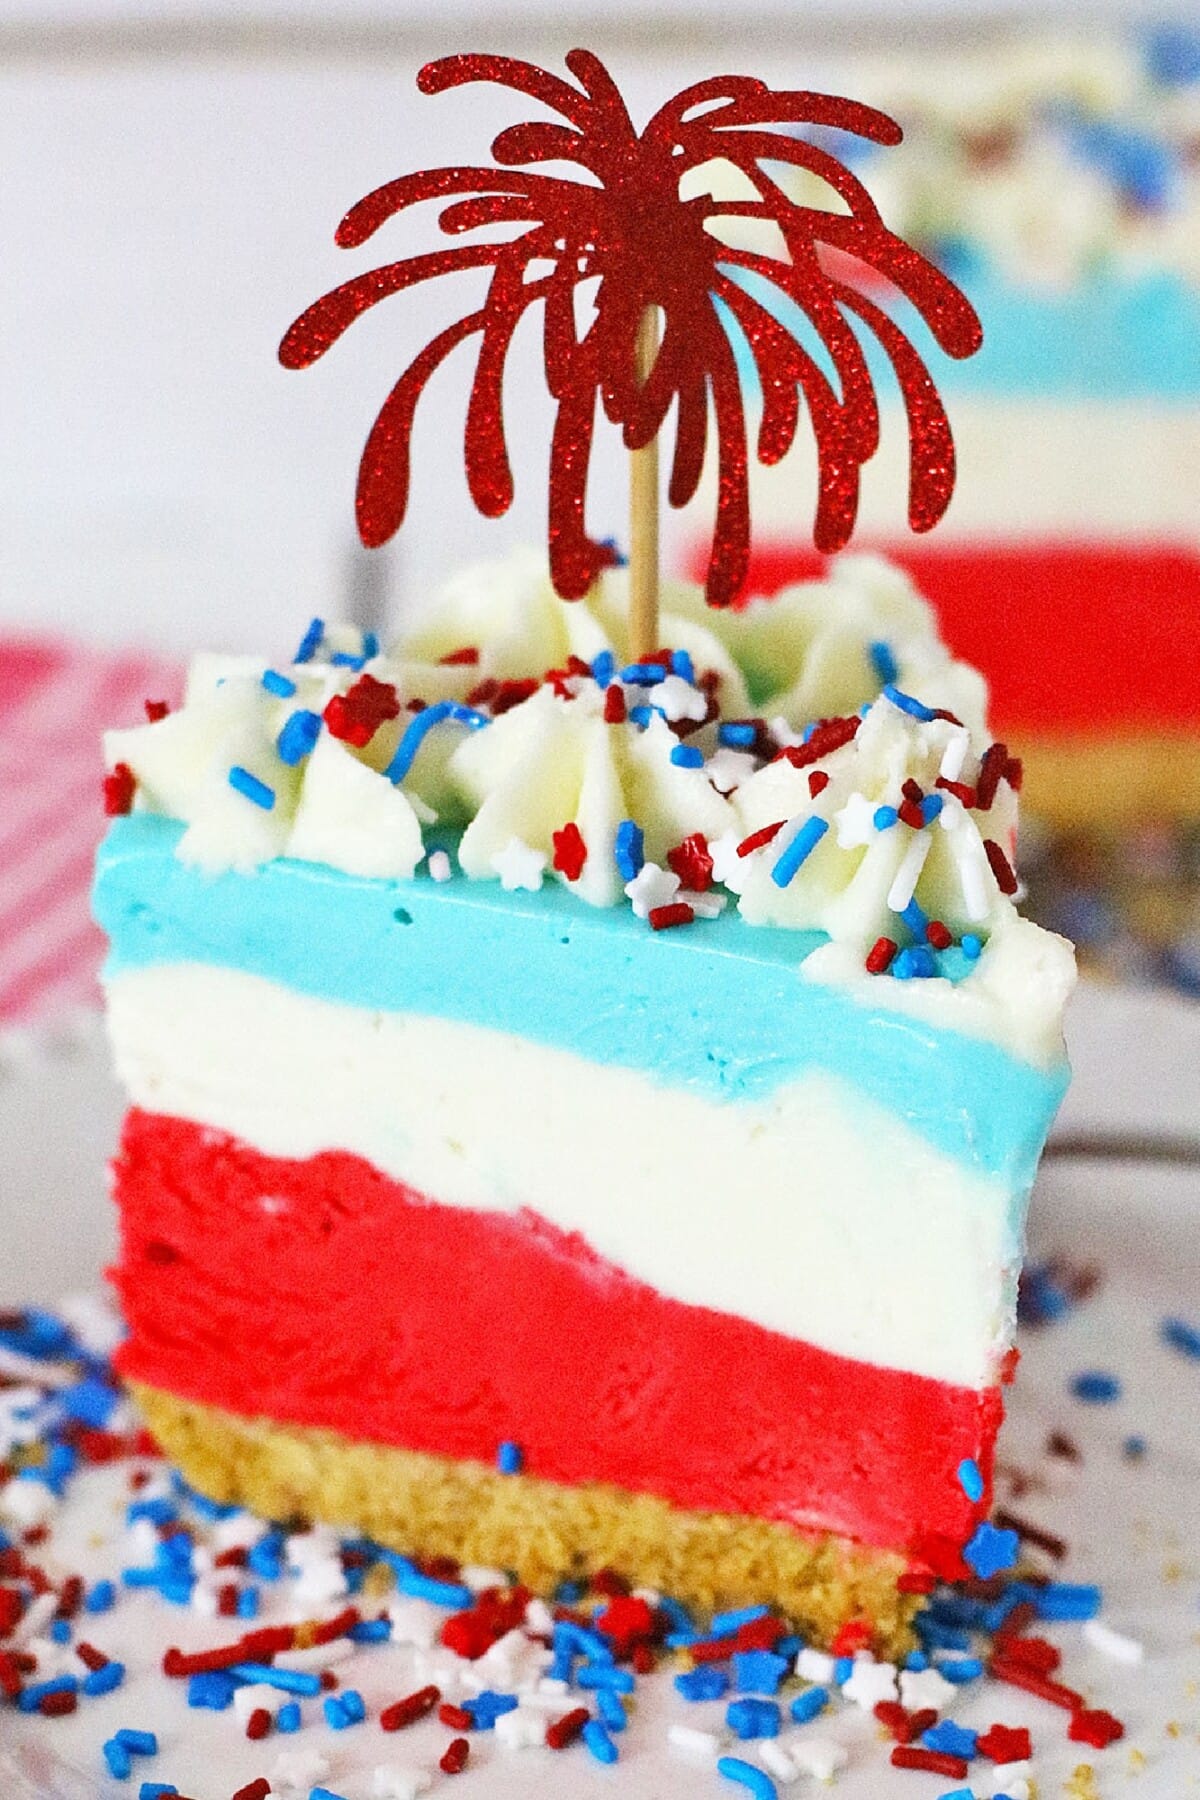 4th of July Cheesecake feature